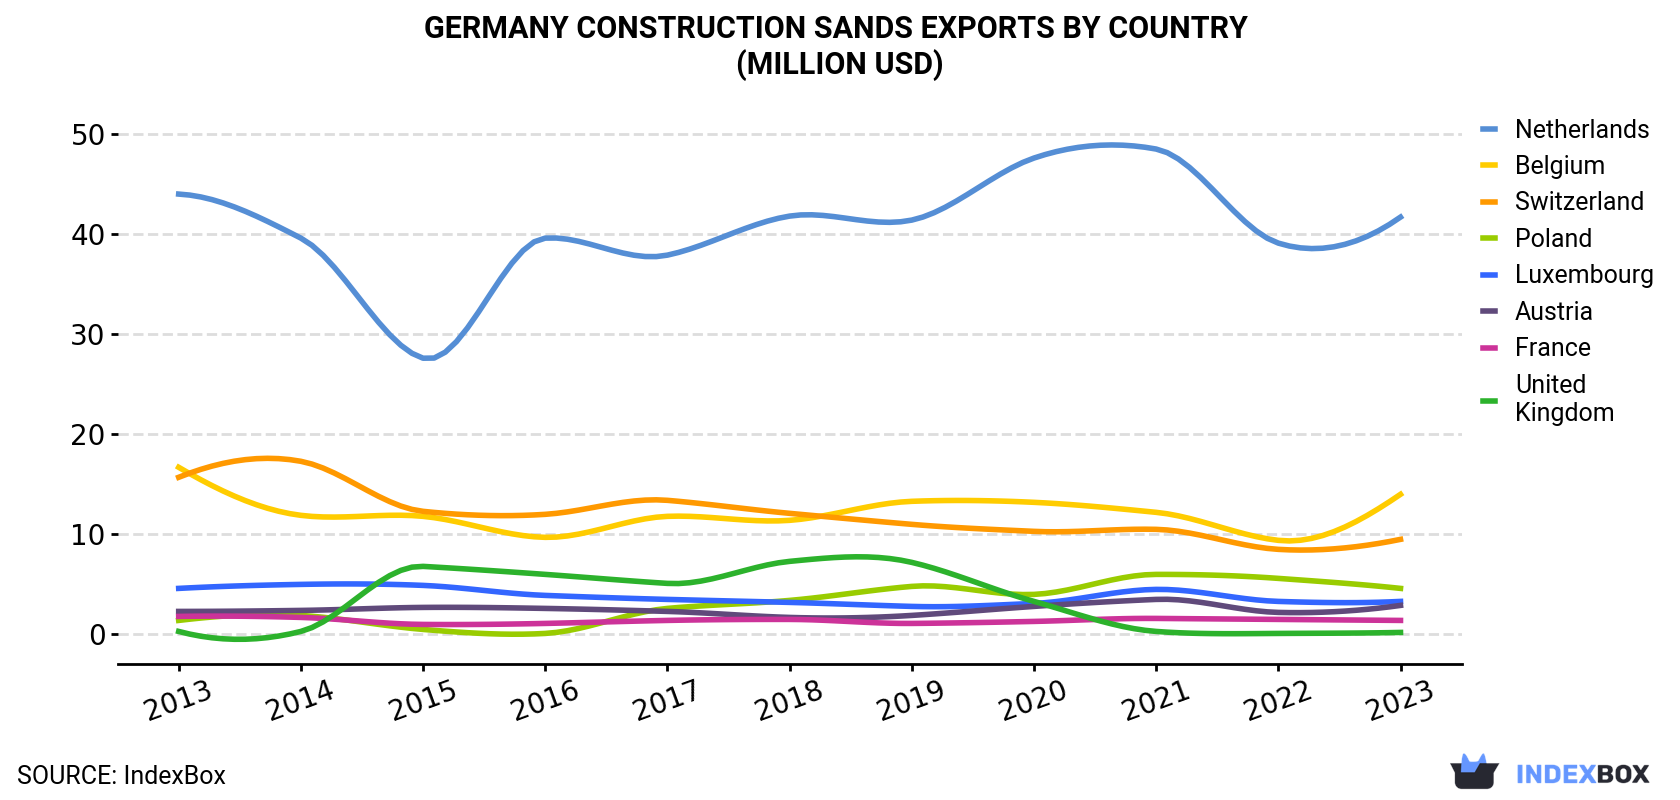 Germany Construction Sands Exports By Country (Million USD)